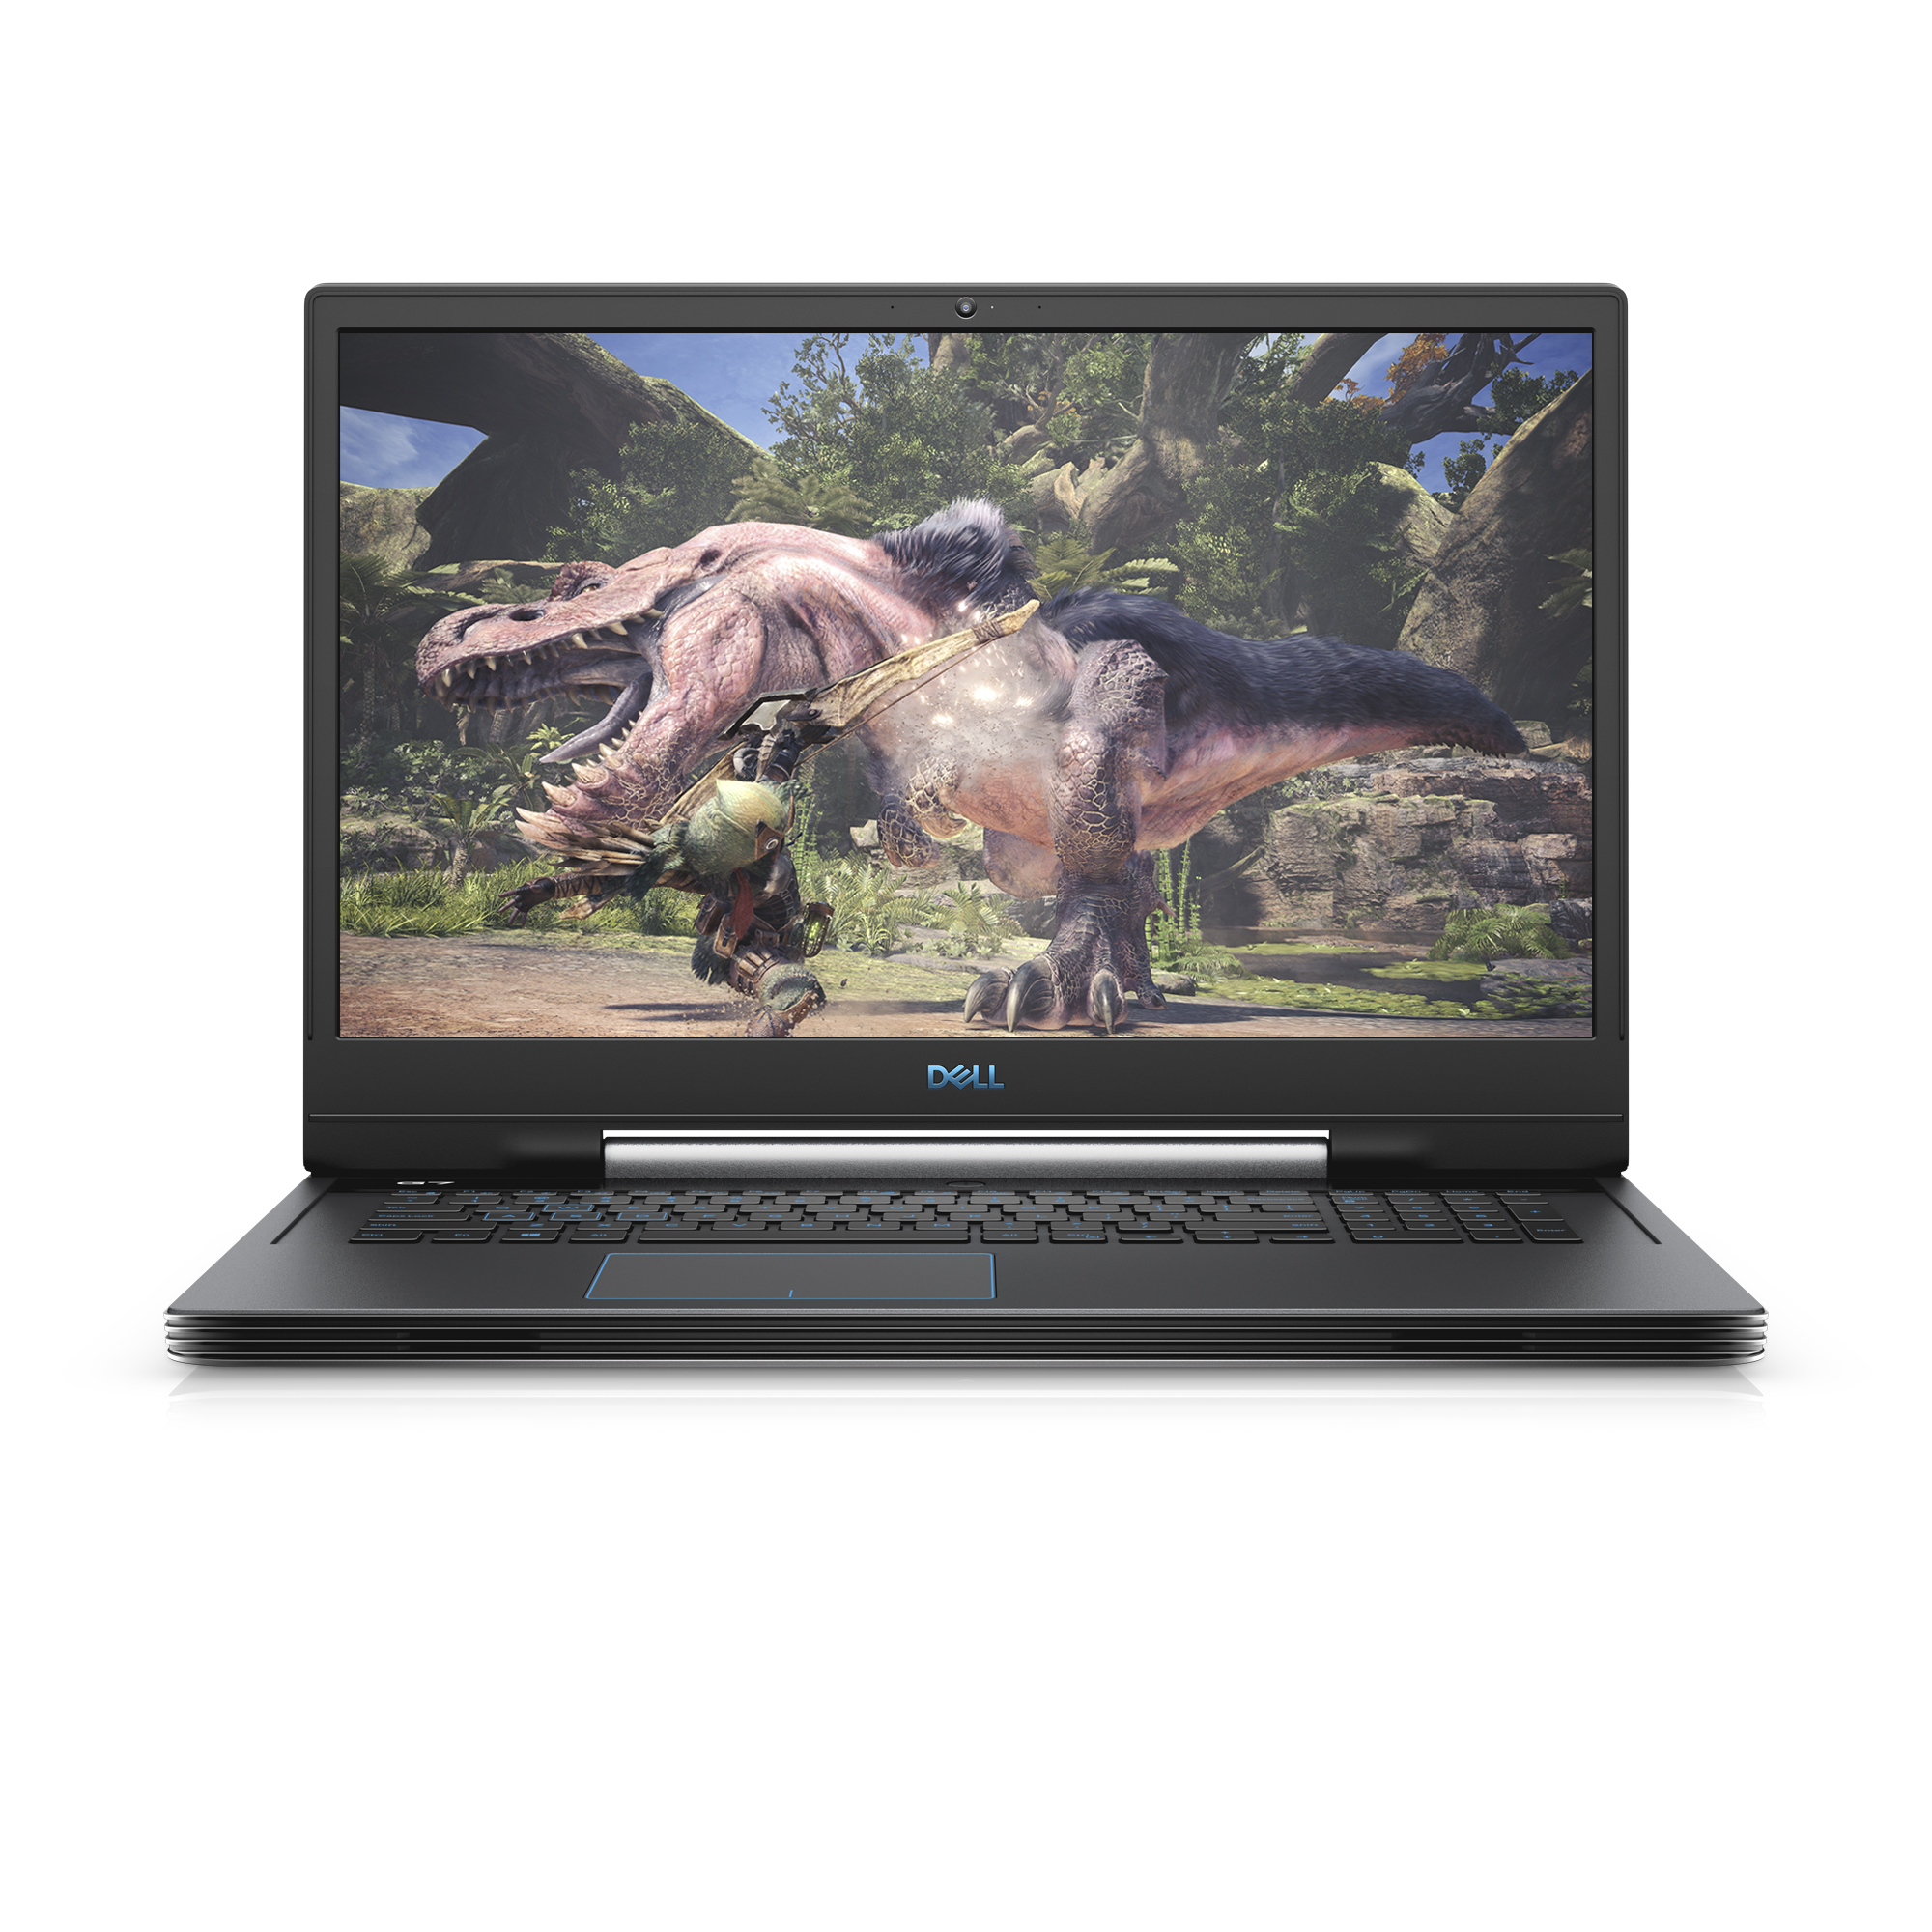 Dell G7 17 7790 Gaming Laptop, 17.3'' FHD, Intel Core i5-9300H, NVIDIA GeForce RTX 2060, 8GB RAM, 128 GB SSD + 1TB HDD, Windows 10 Home, G7790-5695GRY-PUS (Google Classroom Compatible) - image 3 of 16